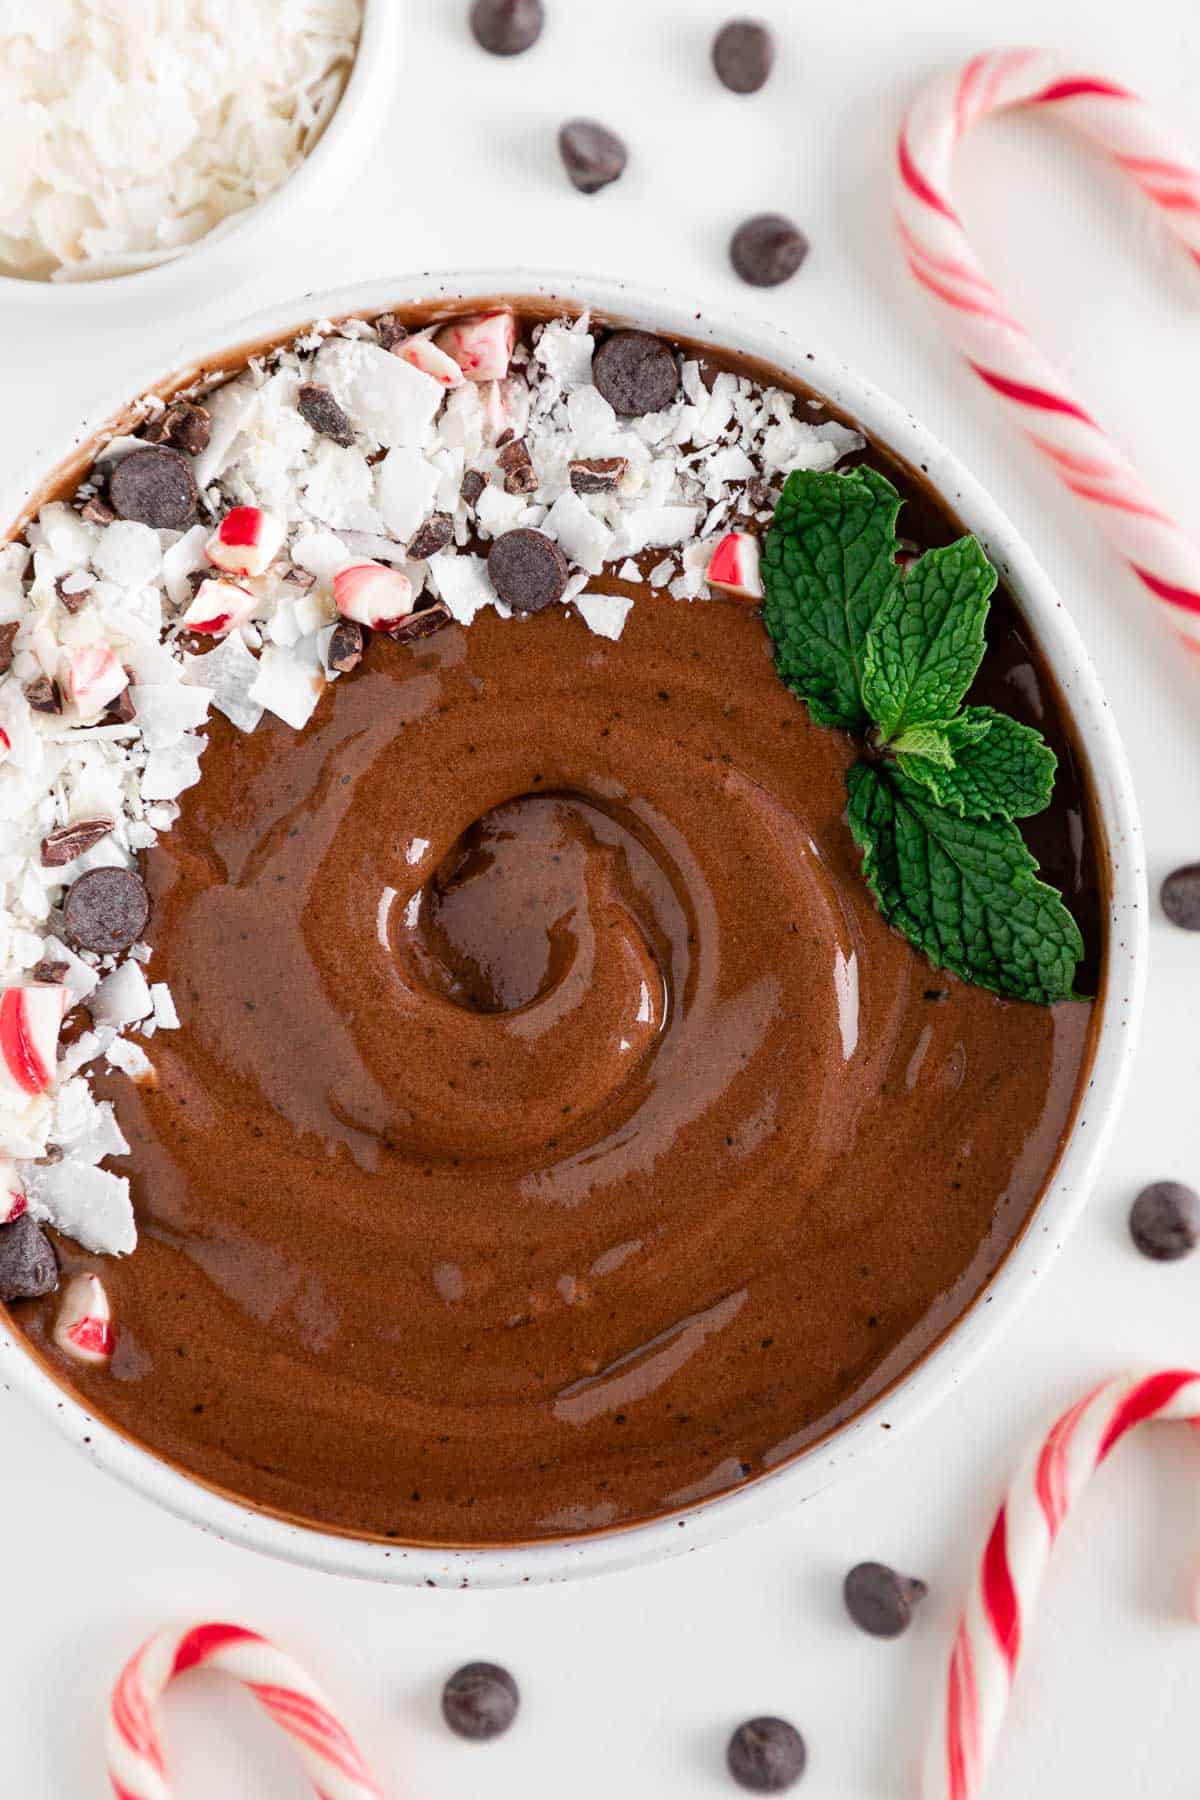 a chocolate peppermint mocha smoothie bowl surrounded by candy canes, chocolate chips, and coconut flakes